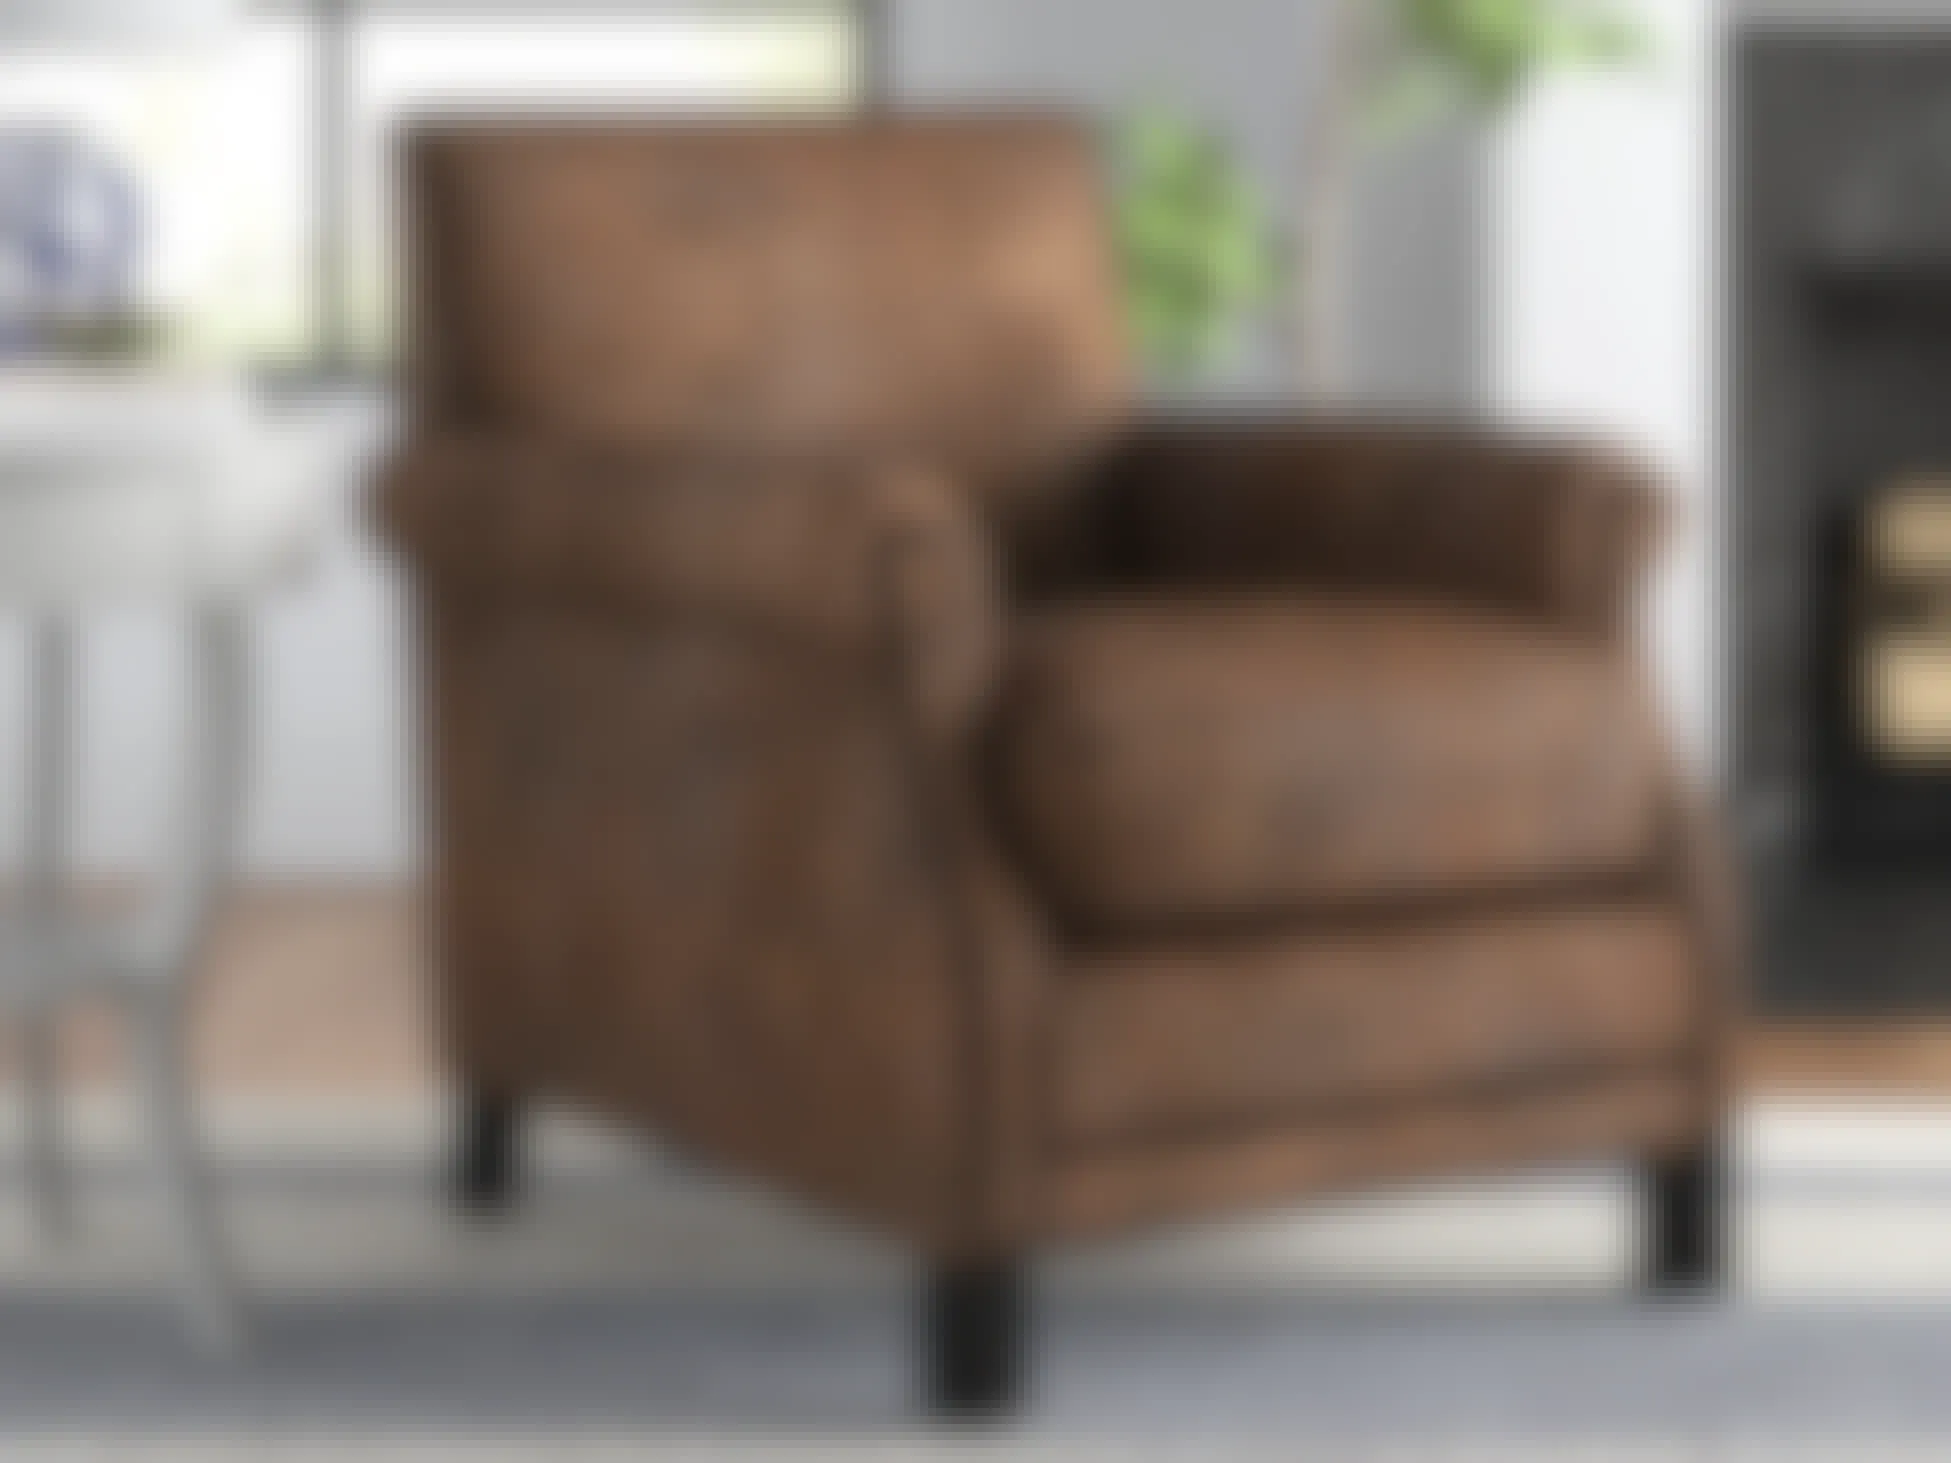 A Brown Leather Look-alike Club Chair from Wayfair staged in a living room.